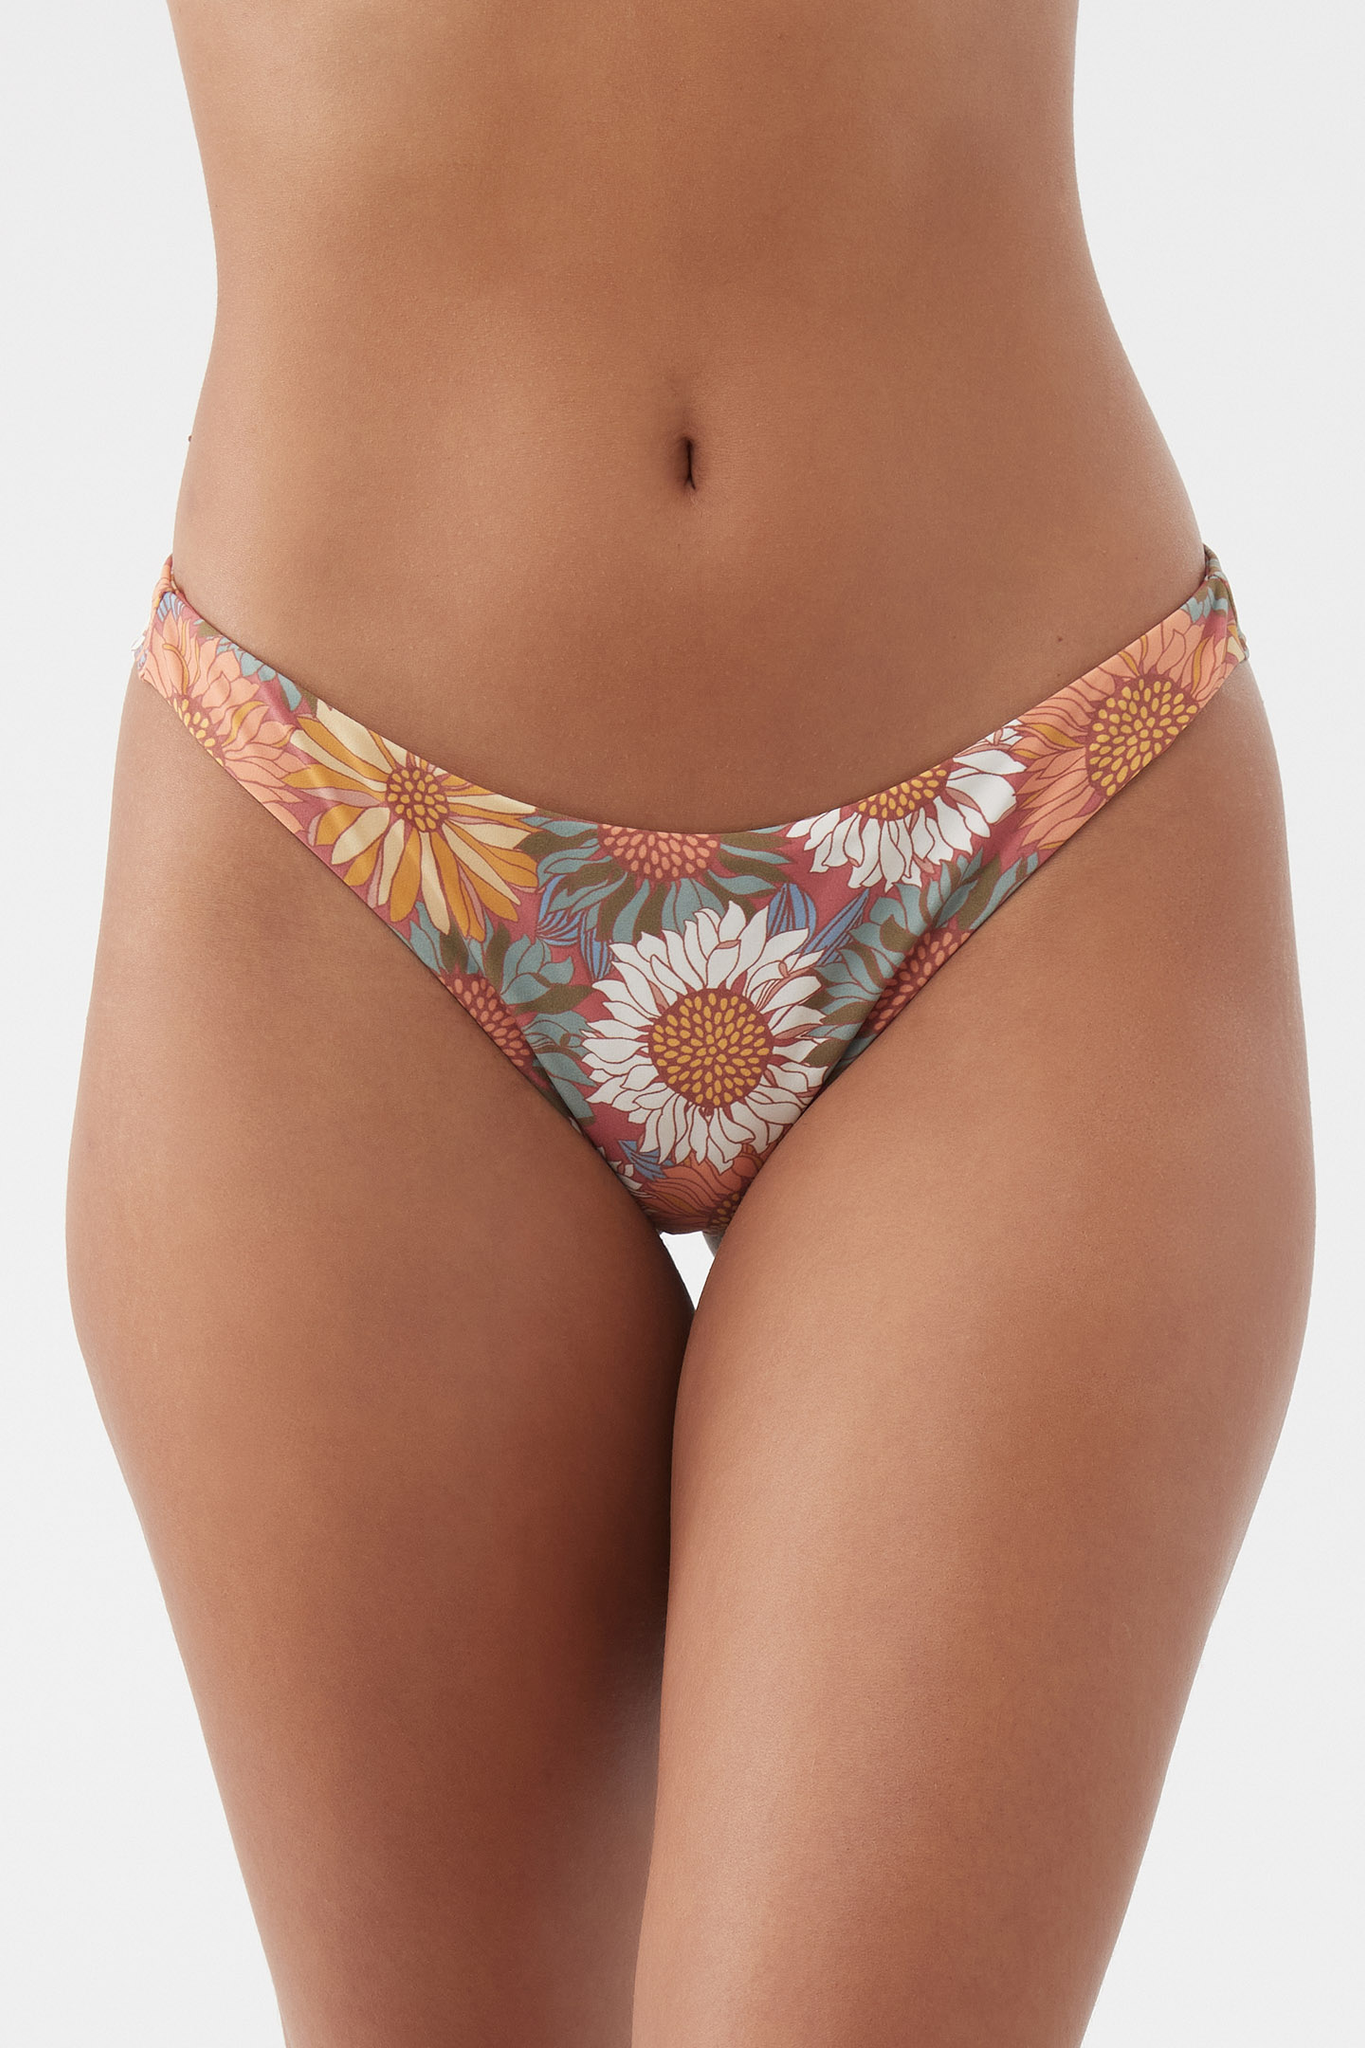 High Summer ASOS Swimsuits Try-On - OpalbyOpal